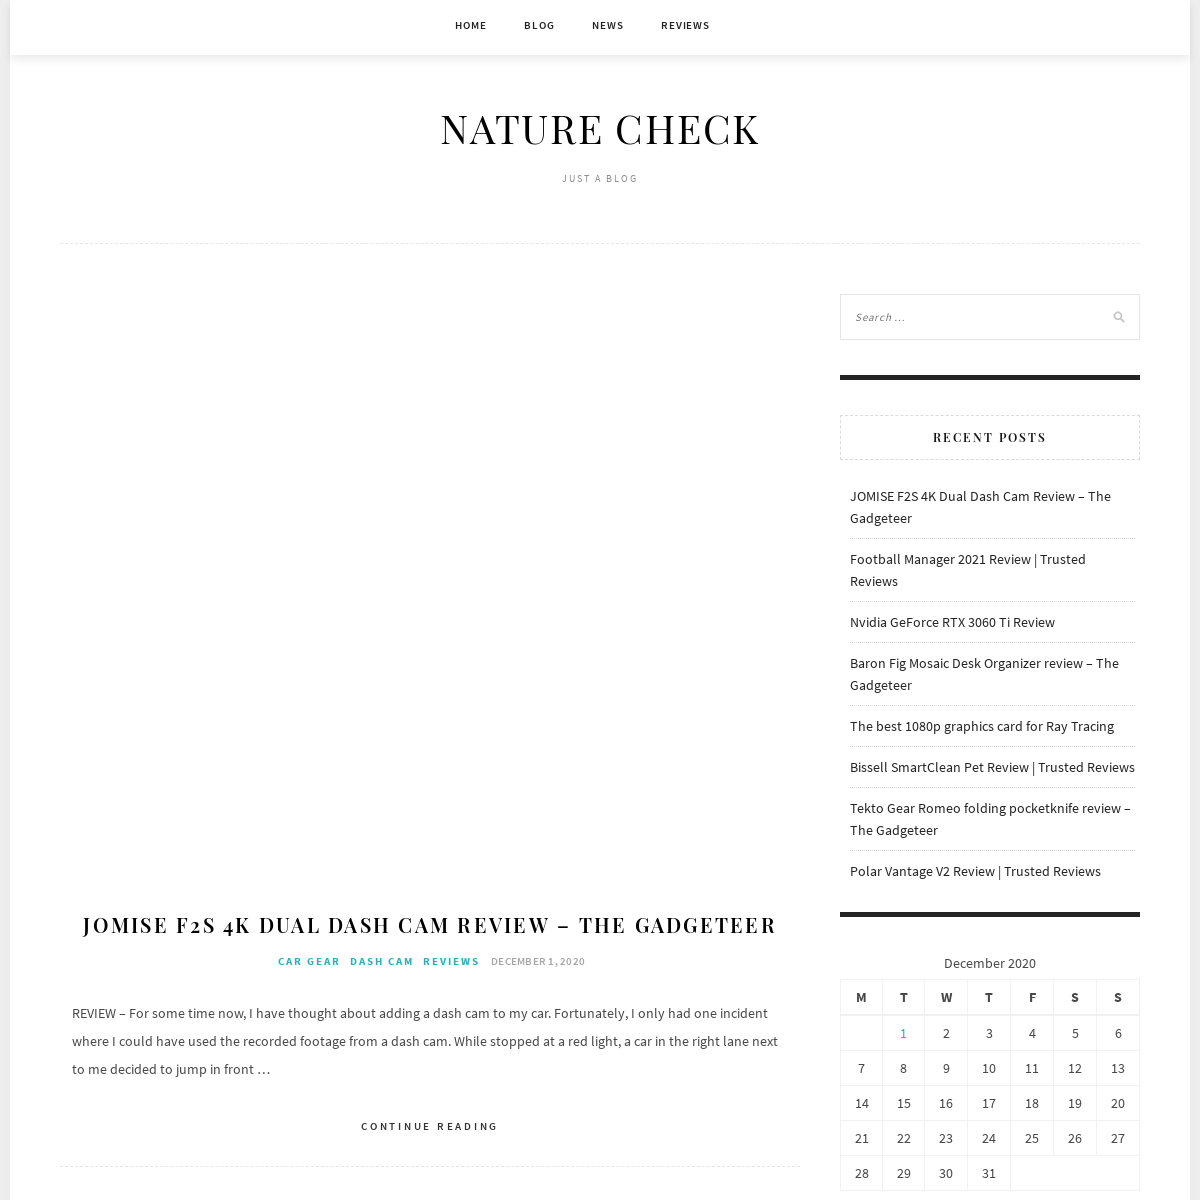 A complete backup of naturecheck.org